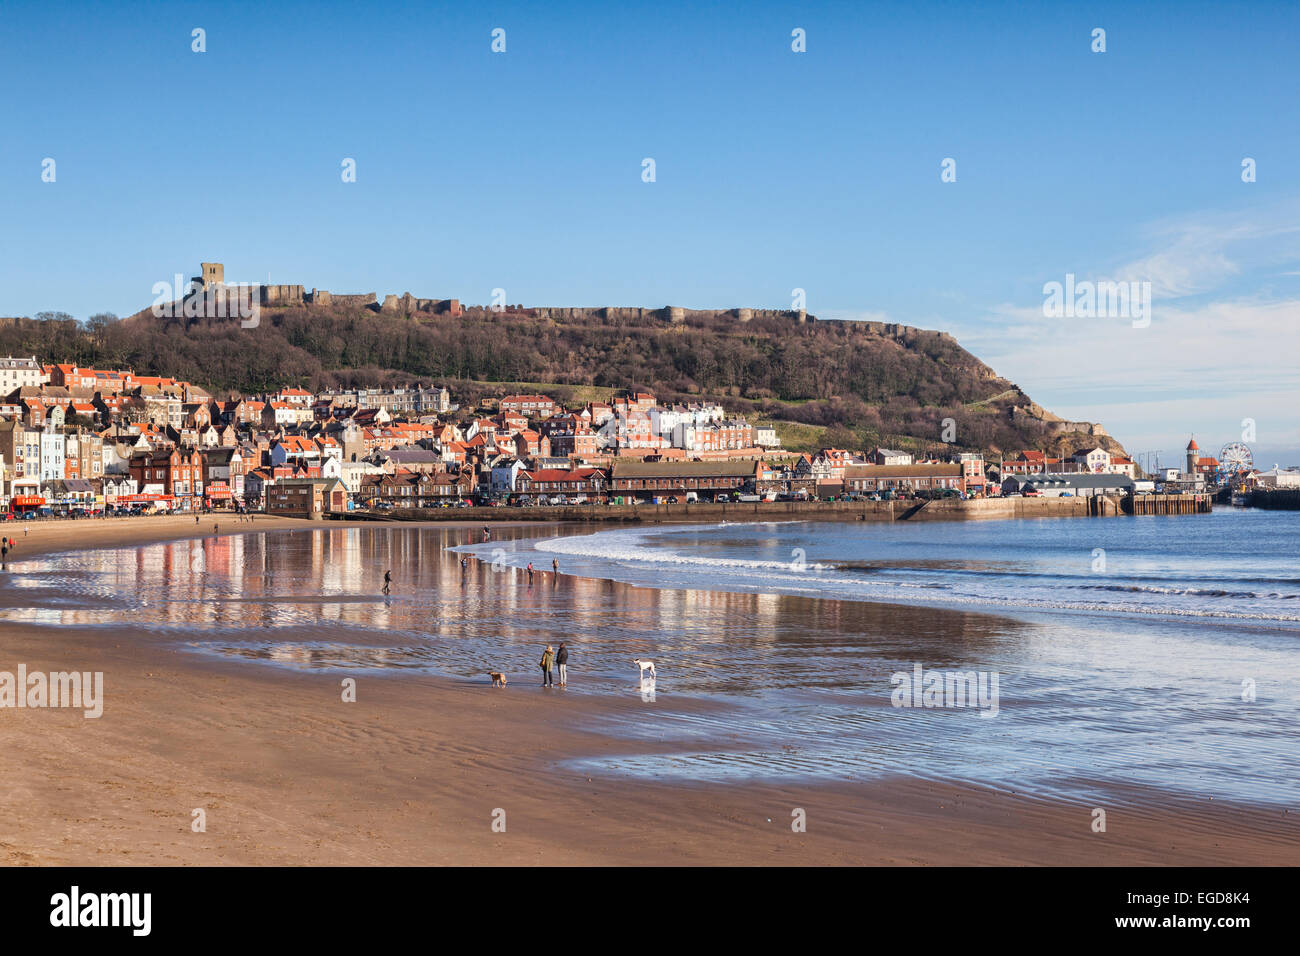 A bright winter day in Scarborough, North Yorkshire, England, UK, a view over the beach to the castle, with people walking dogs. Stock Photo